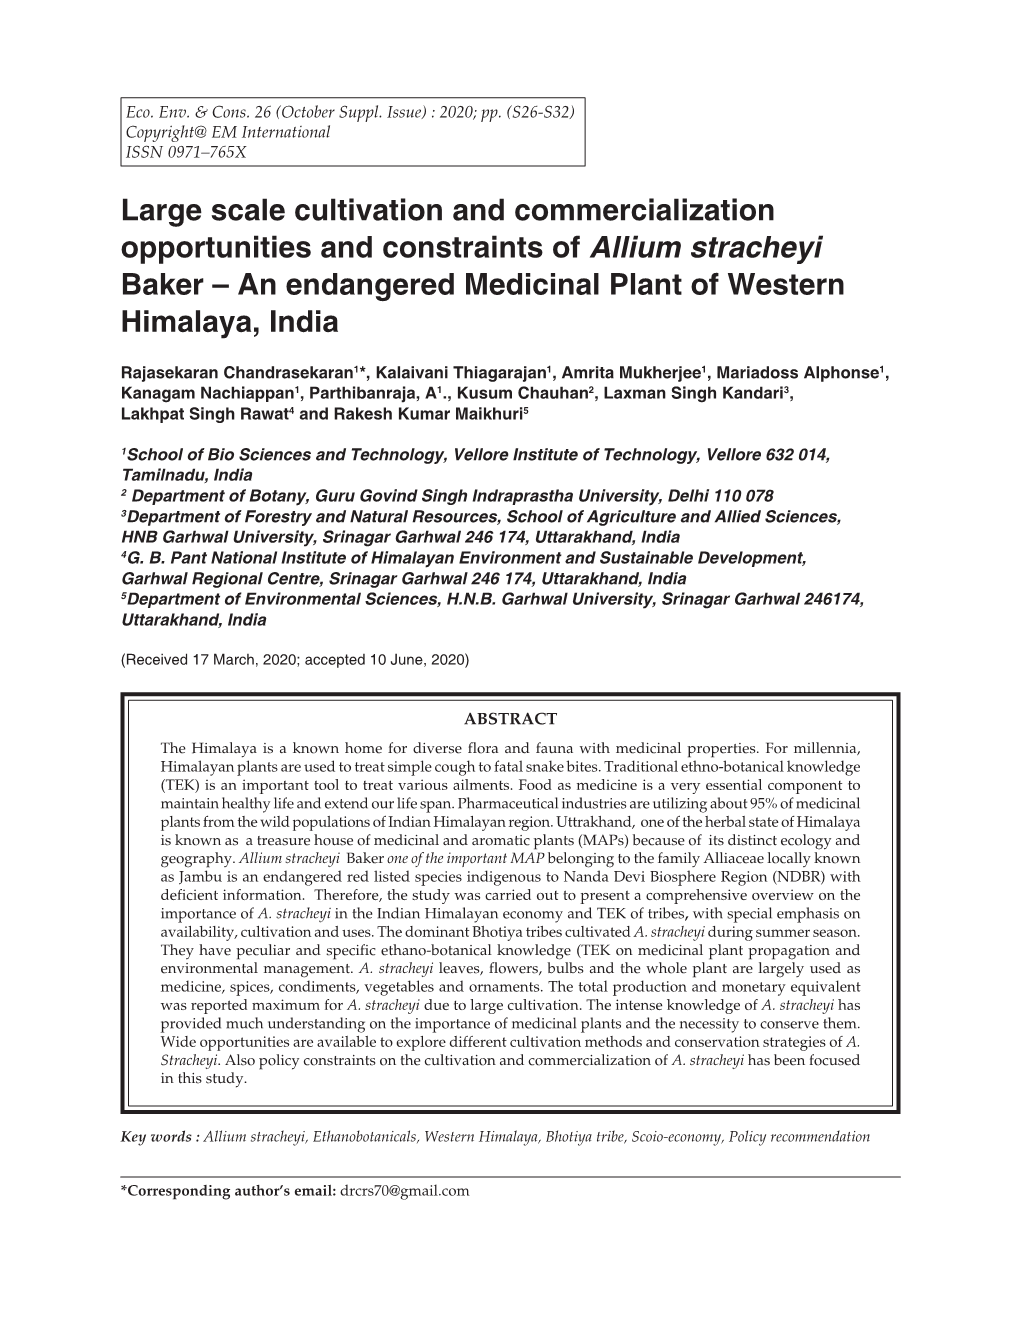 Large Scale Cultivation and Commercialization Opportunities and Constraints of Allium Stracheyi Baker – an Endangered Medicinal Plant of Western Himalaya, India